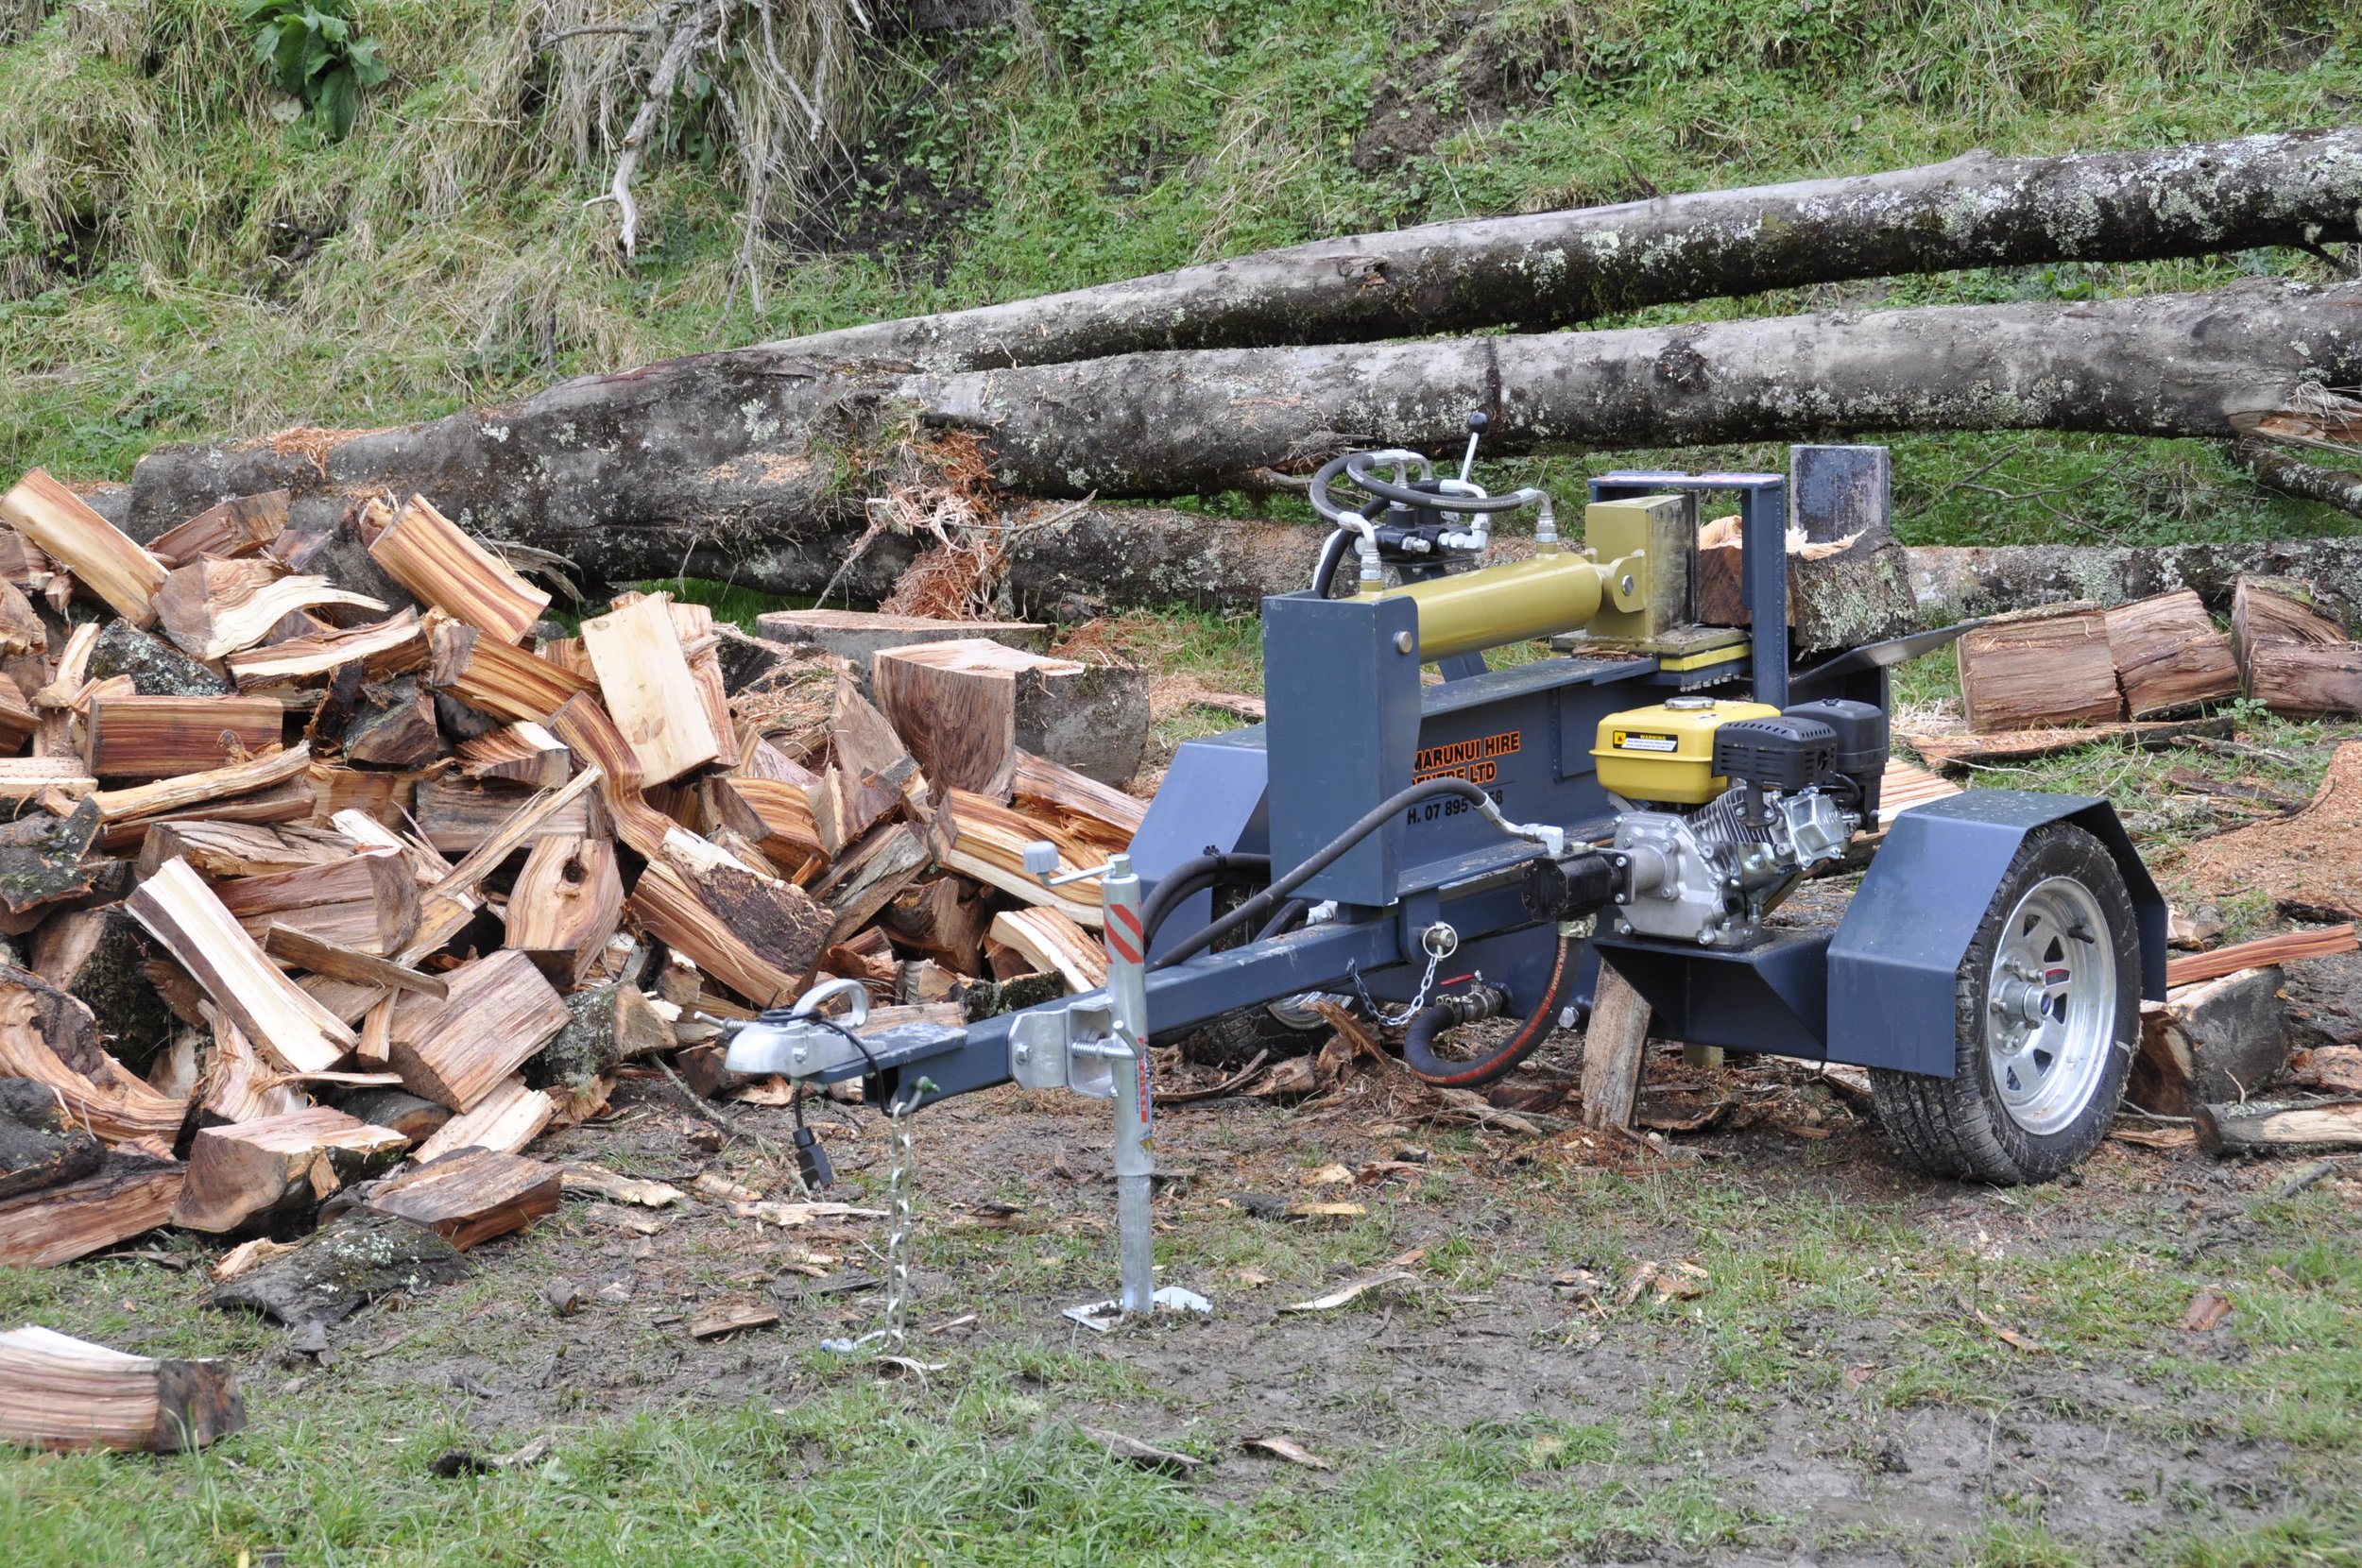 How Strong Are Log Splitters Really?